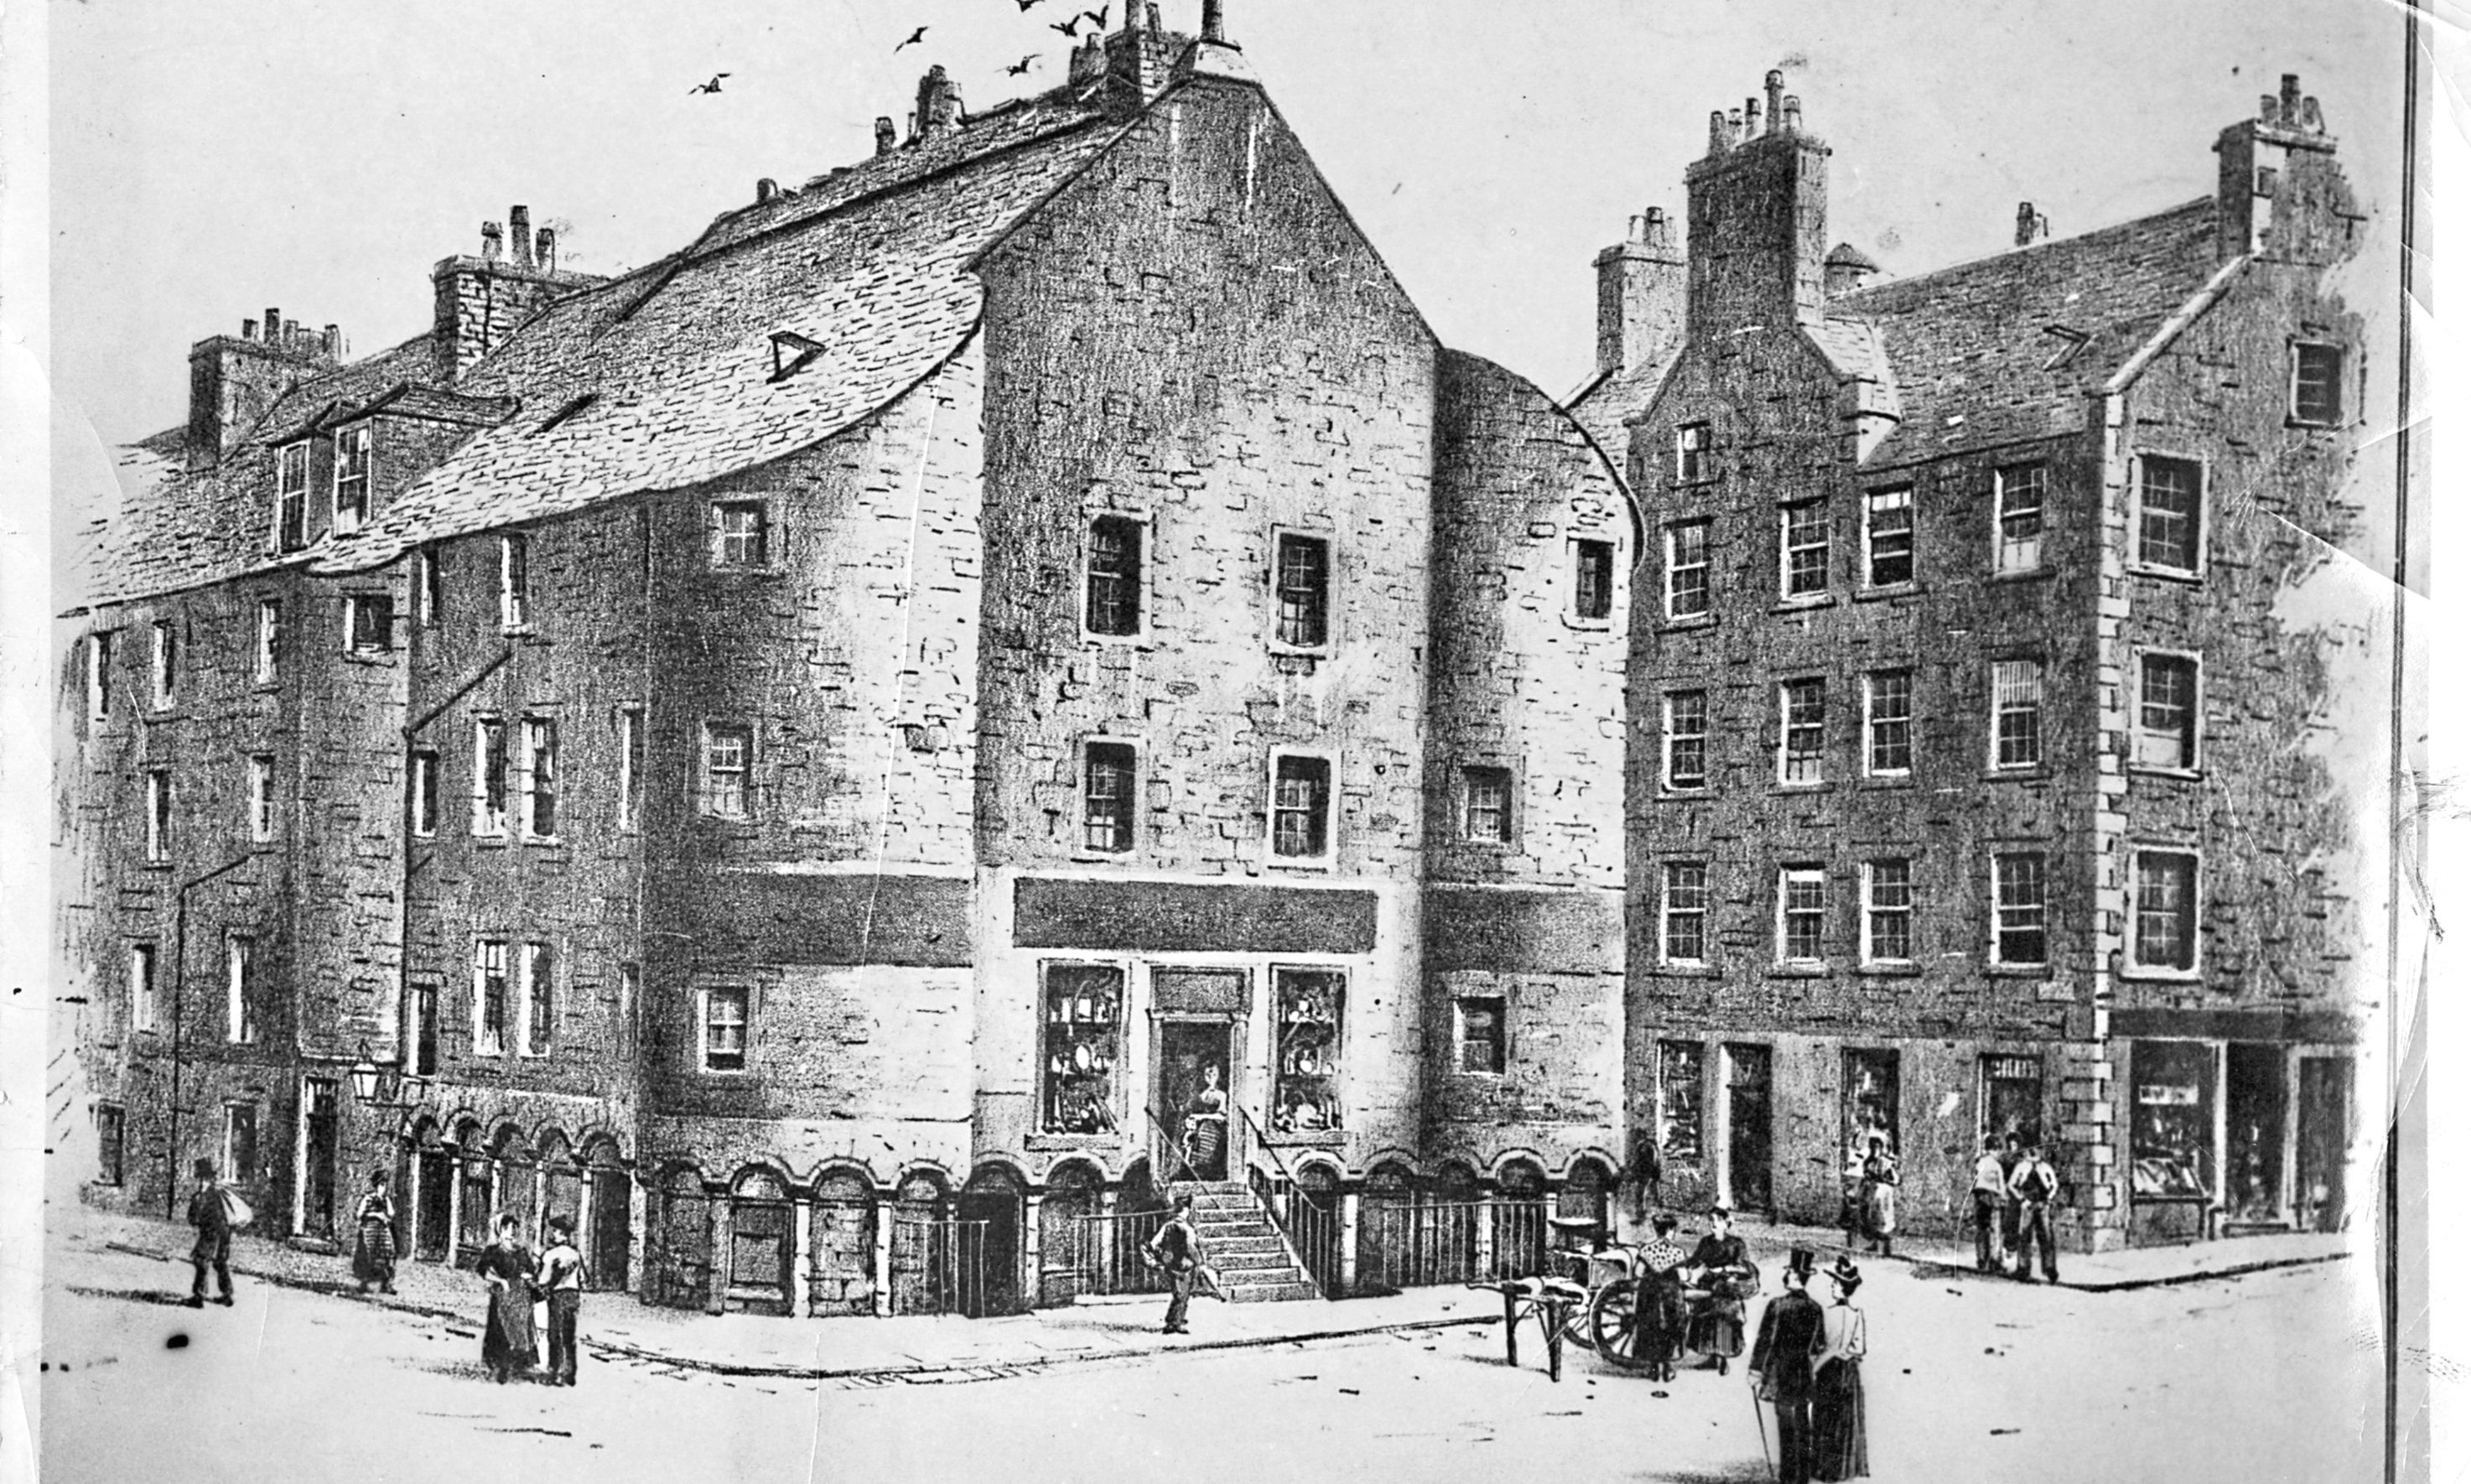 Old Customs House Dundee, Cricthon Street (from People's Journal. John Leng litho).